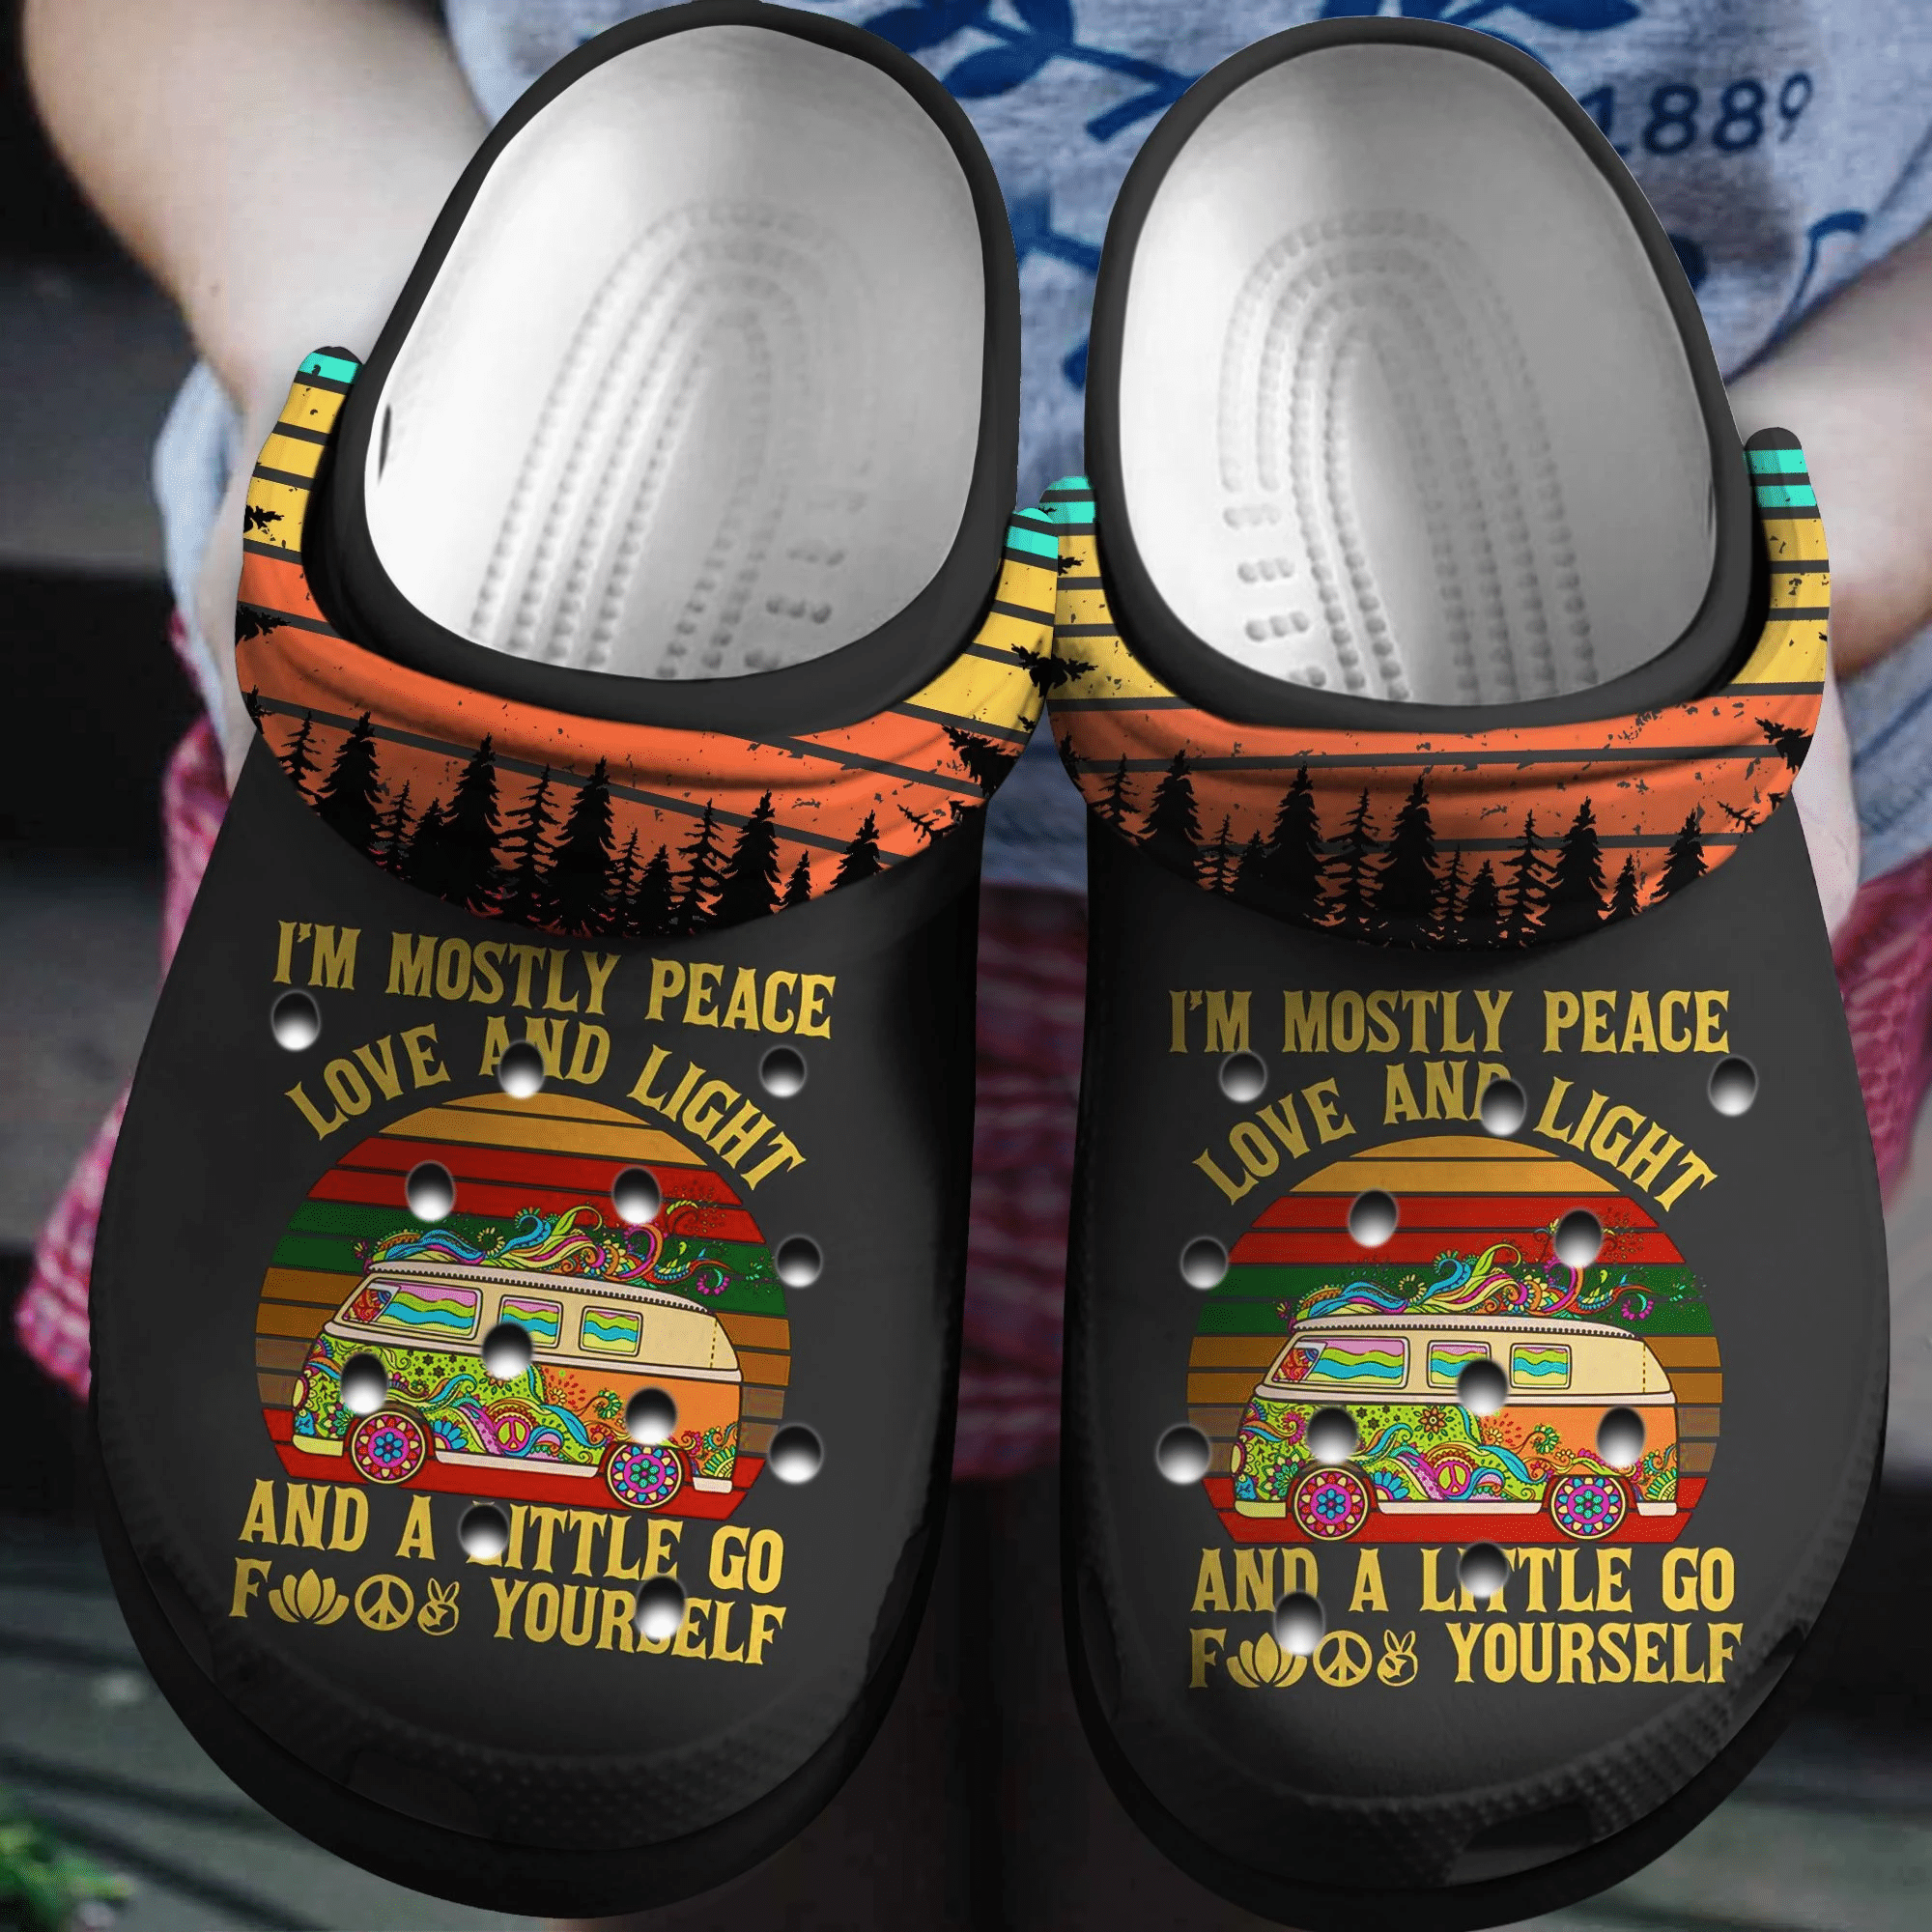 Peace Love And Light Hippie Vans Crocss Shoes – Hippie Bus Crocbland Clog Birthday Gift For Man Woman